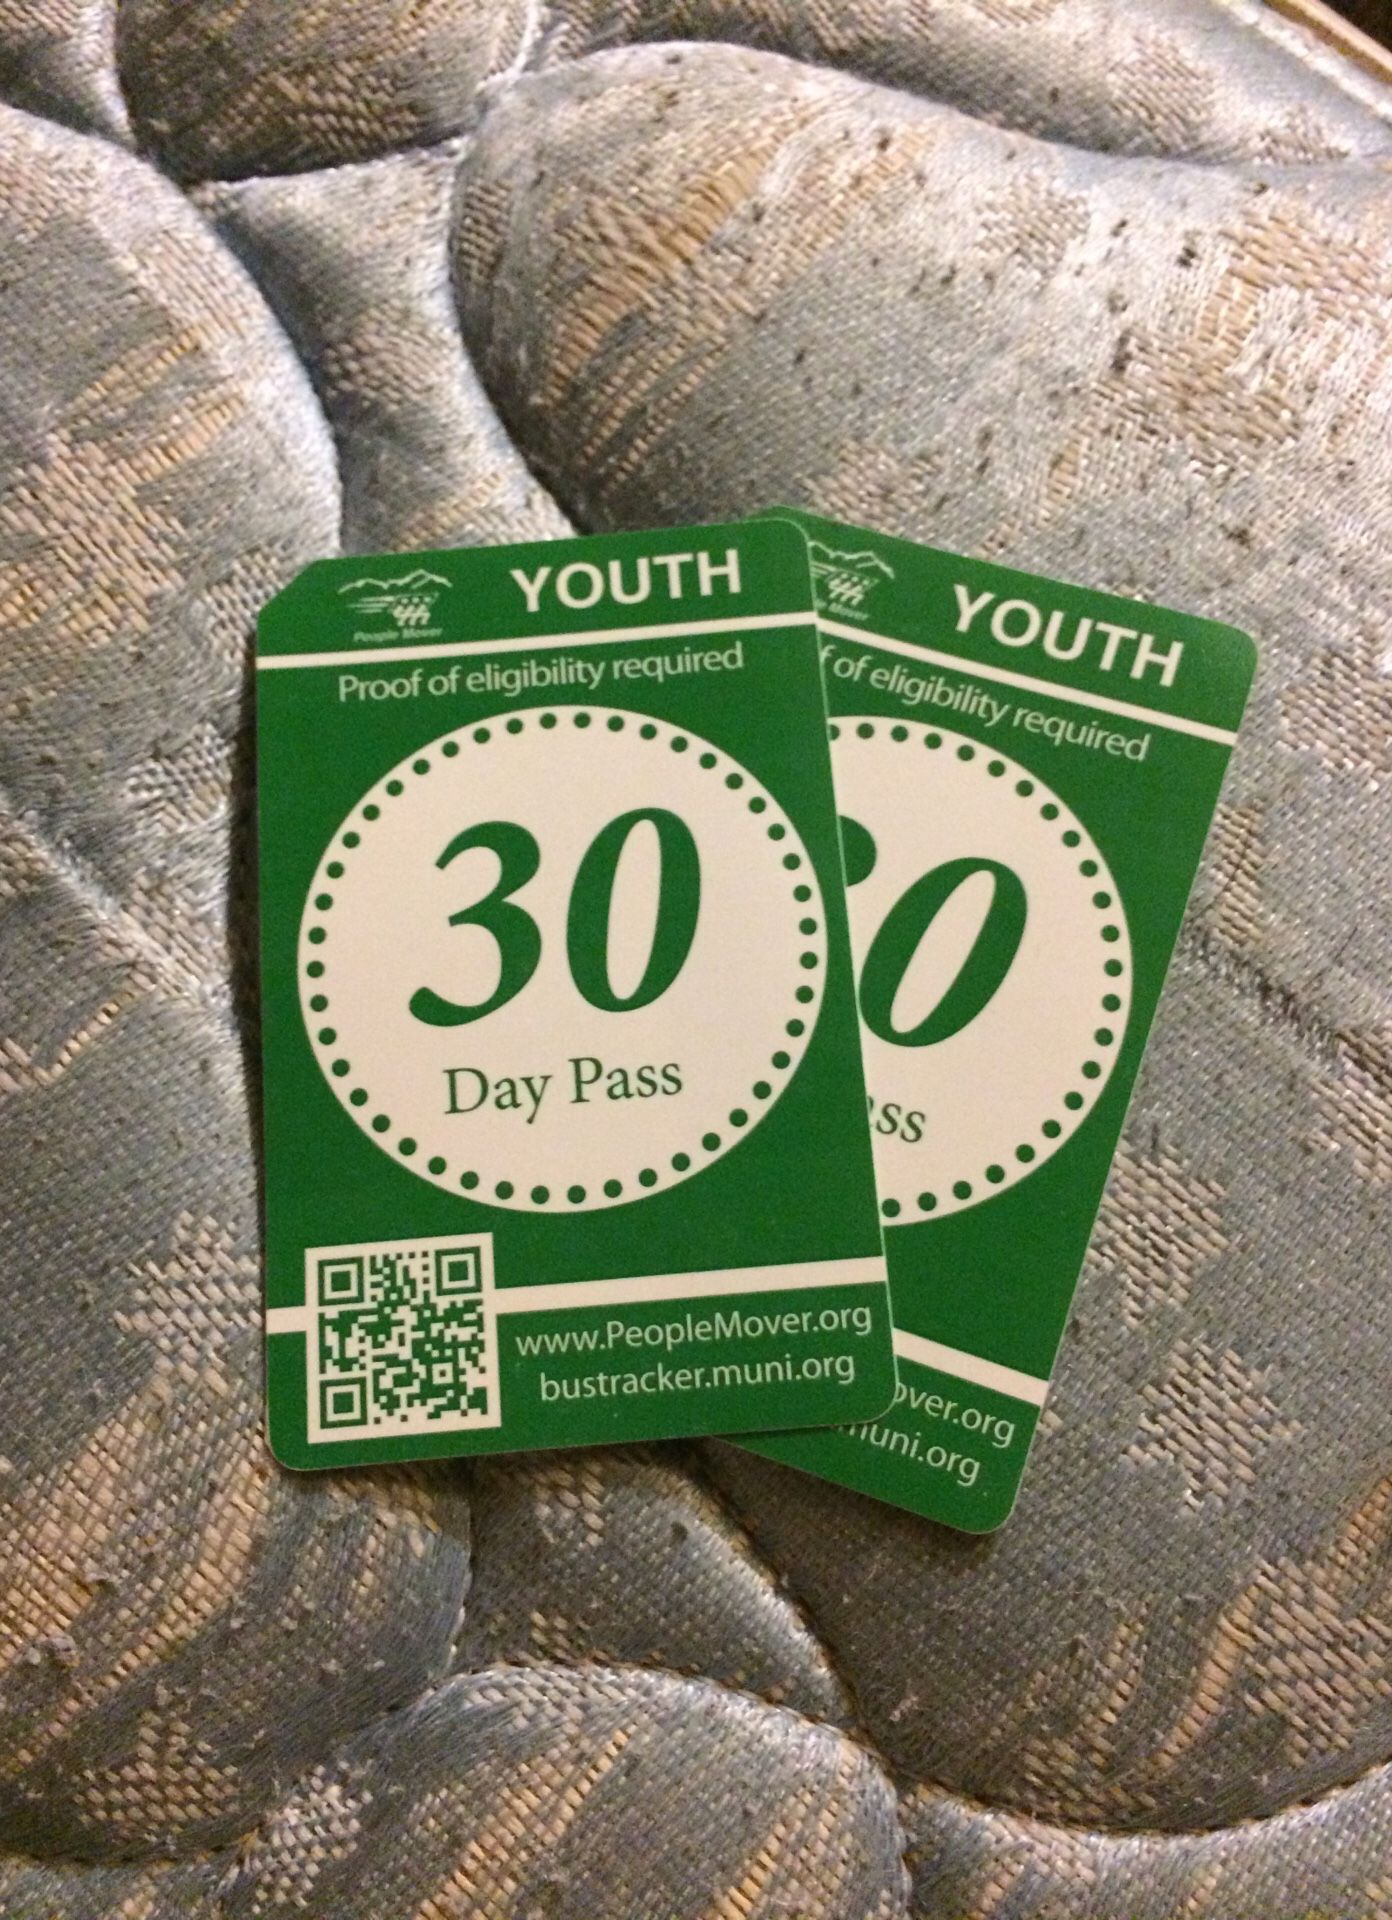 2 People mover youth bus pass